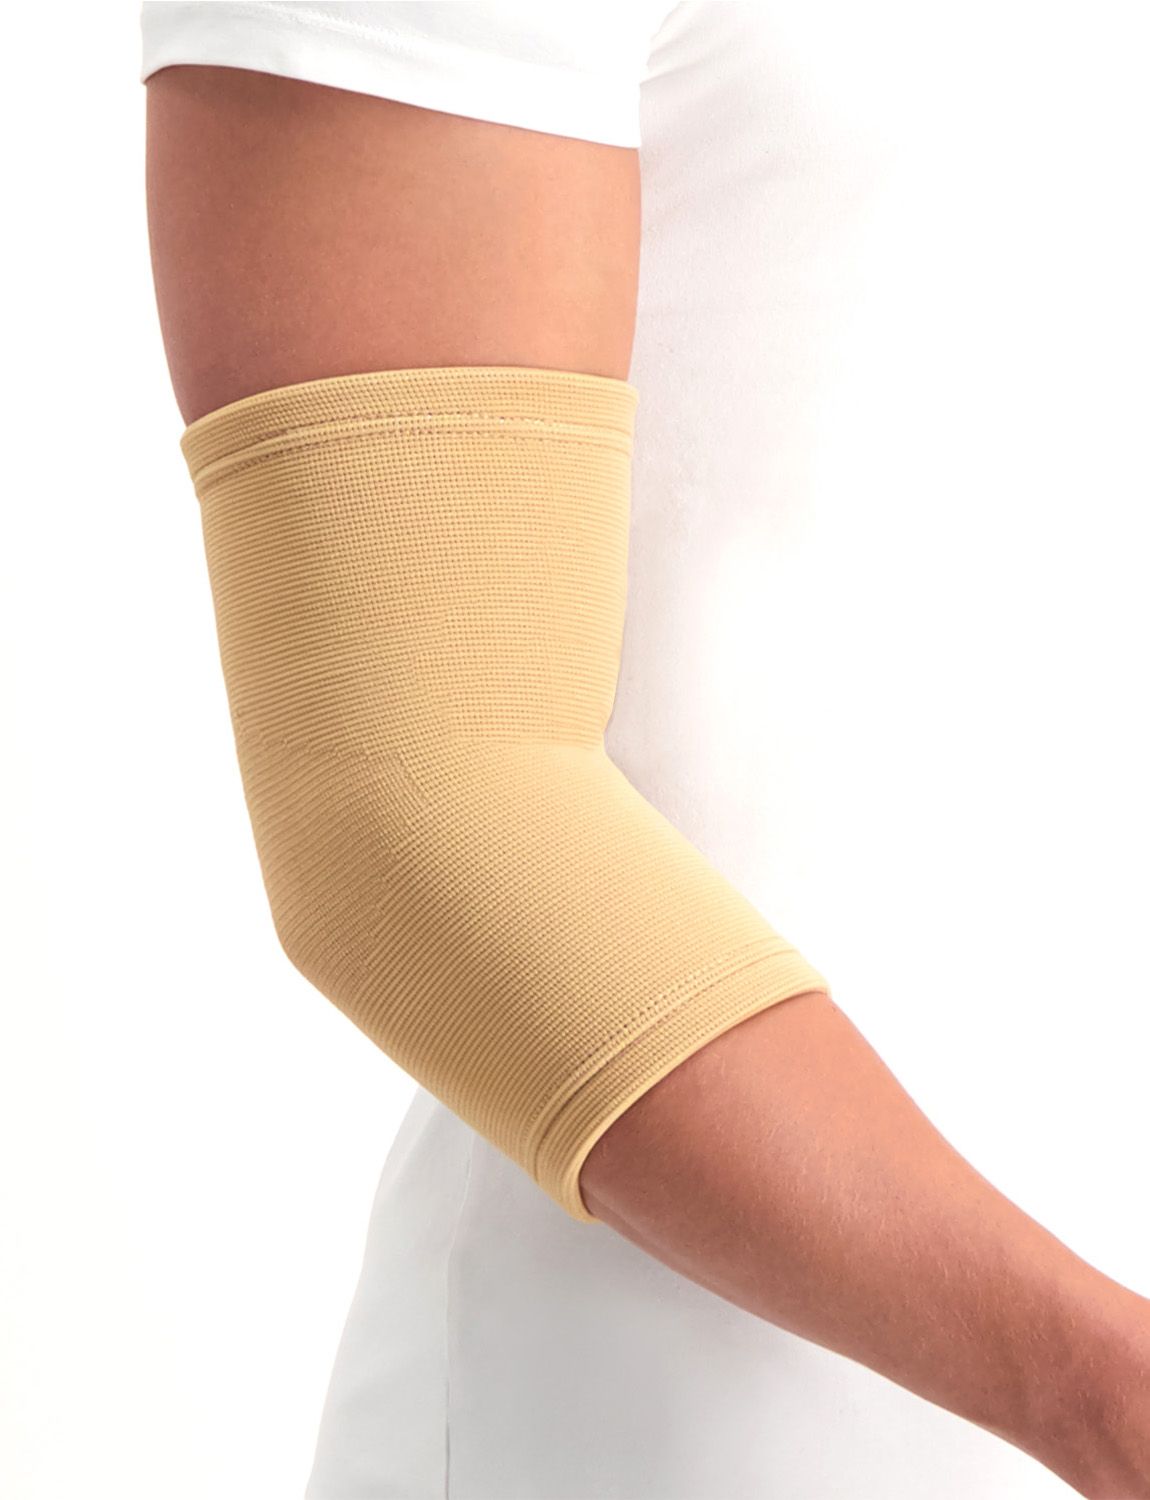 dunimed elbow support for sale